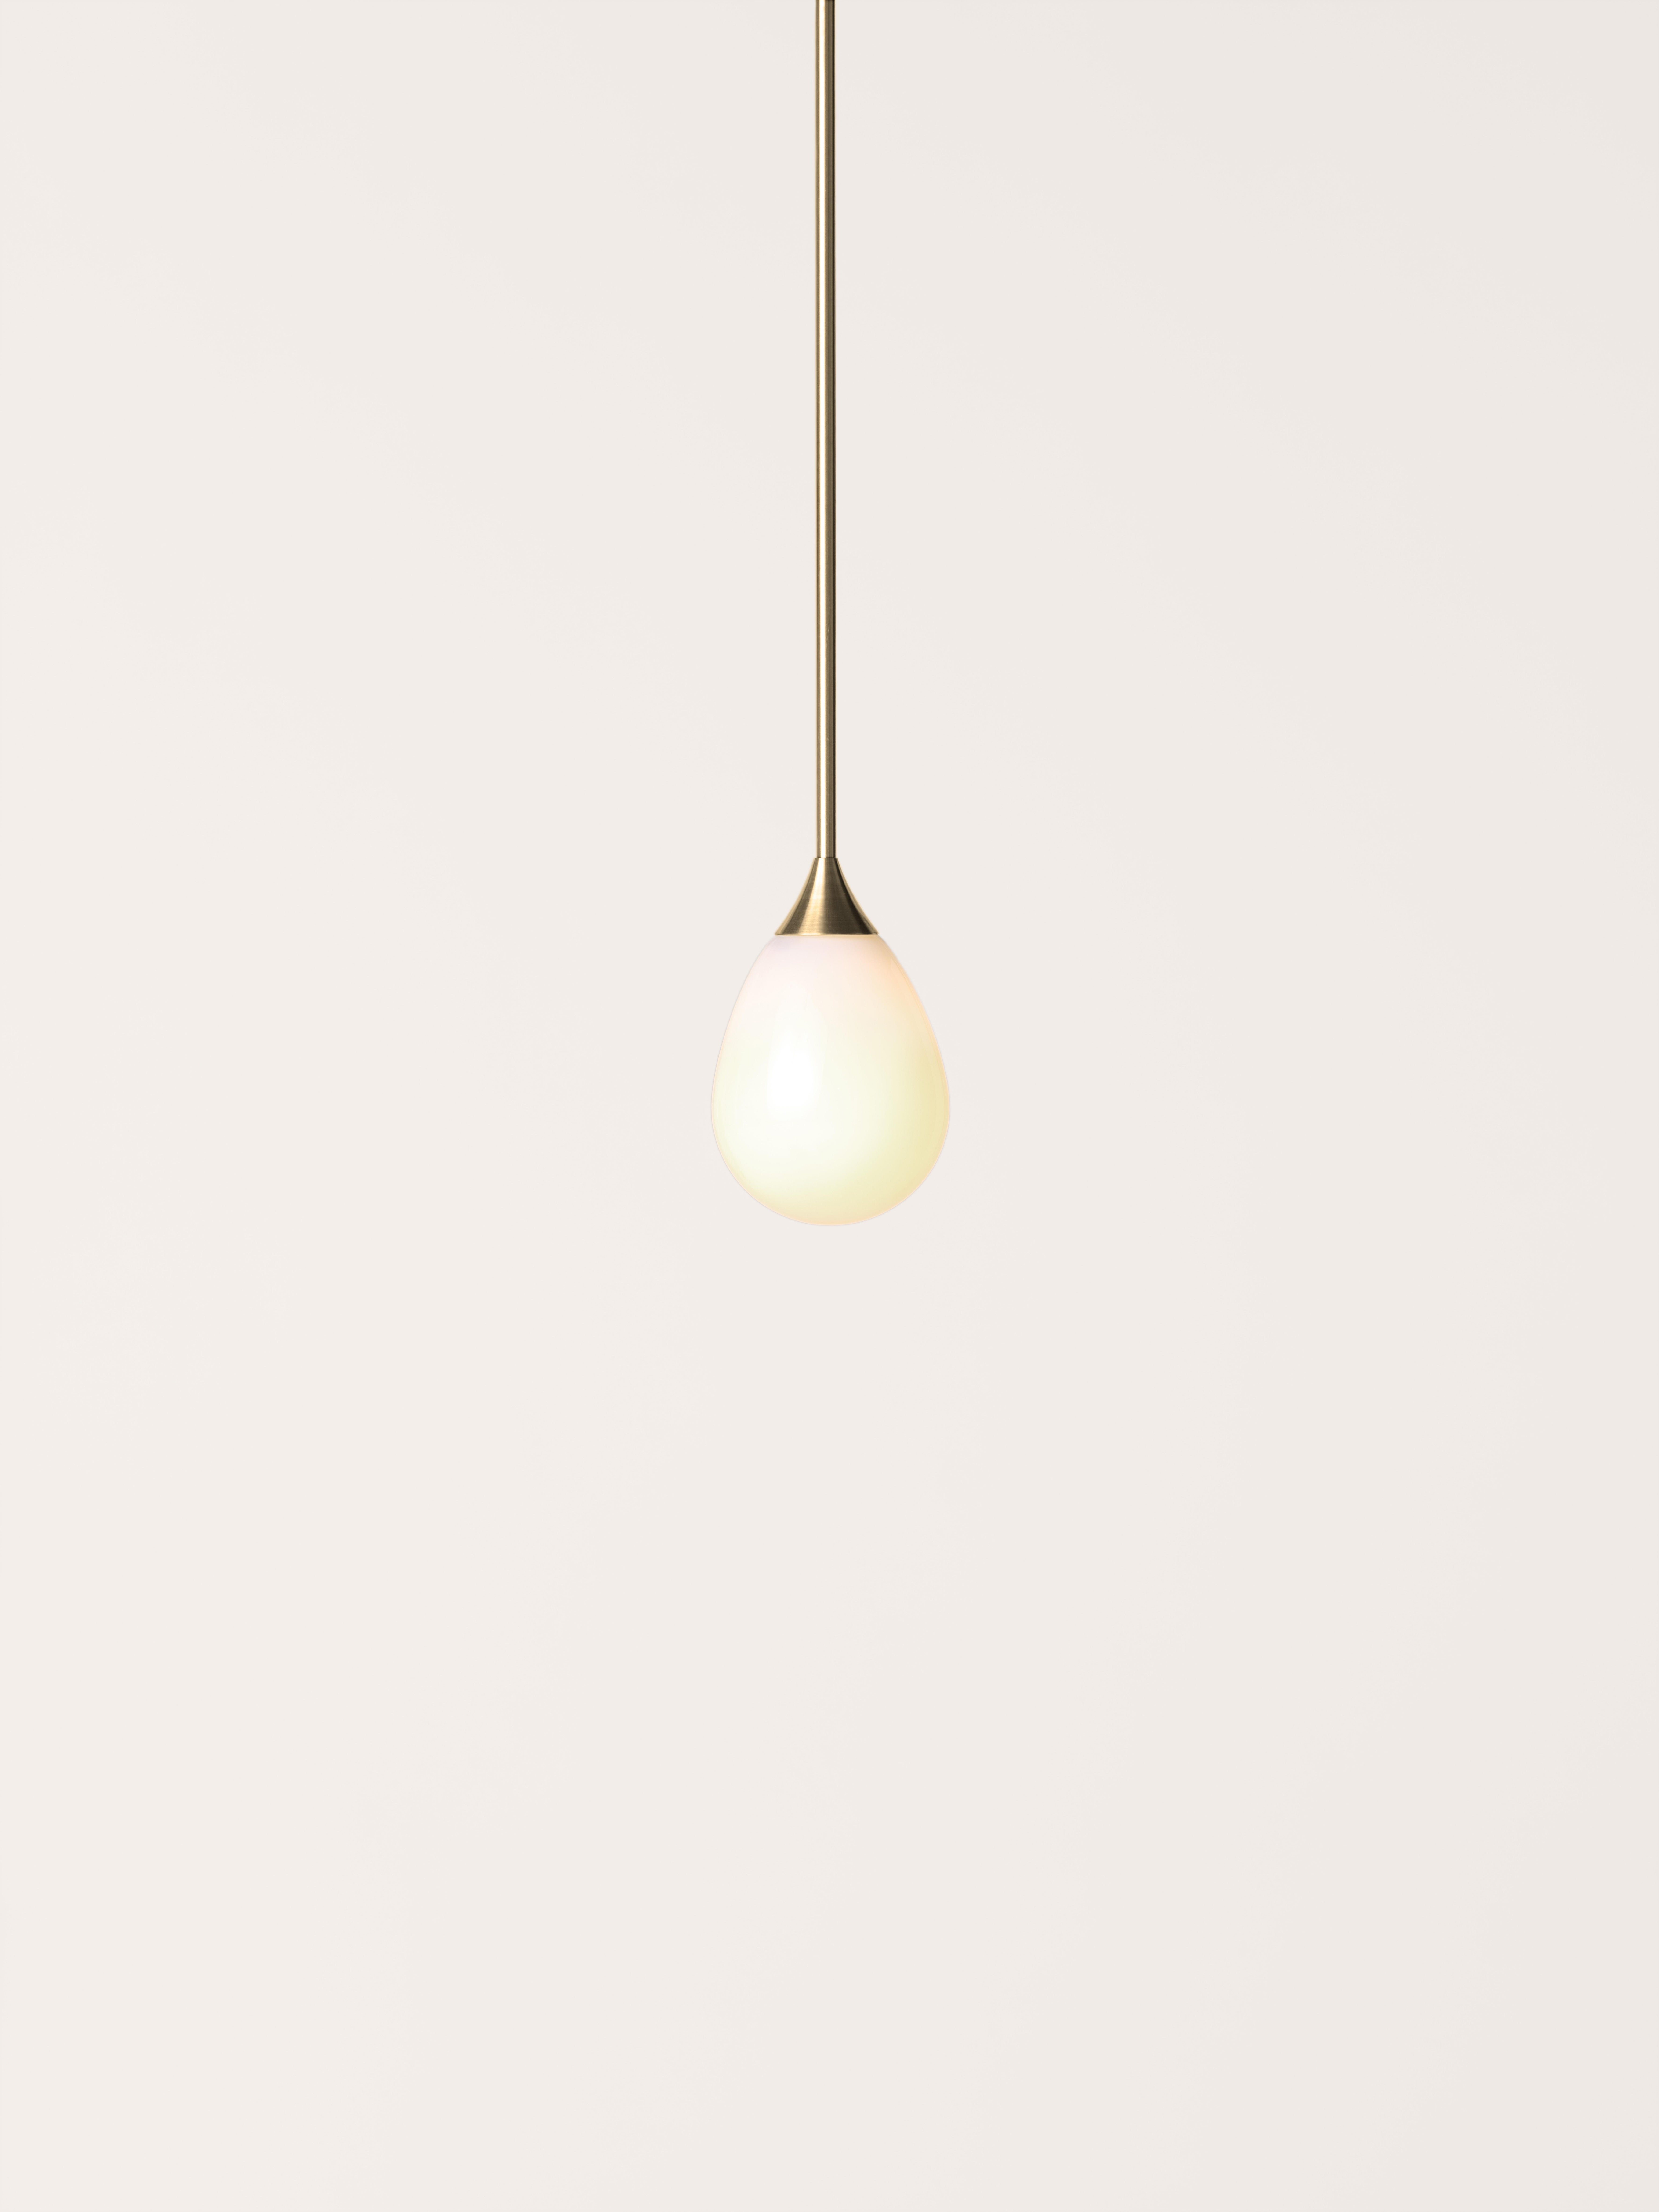 A carefully crafted, hand blown glass pendant hangs from spun brass for an elongated and elegant tear-drop shape. Also available in a larger size, and as a cluster of three or five.

Metal finish:
Satin brass, oil-rubbed bronze, antique brass,